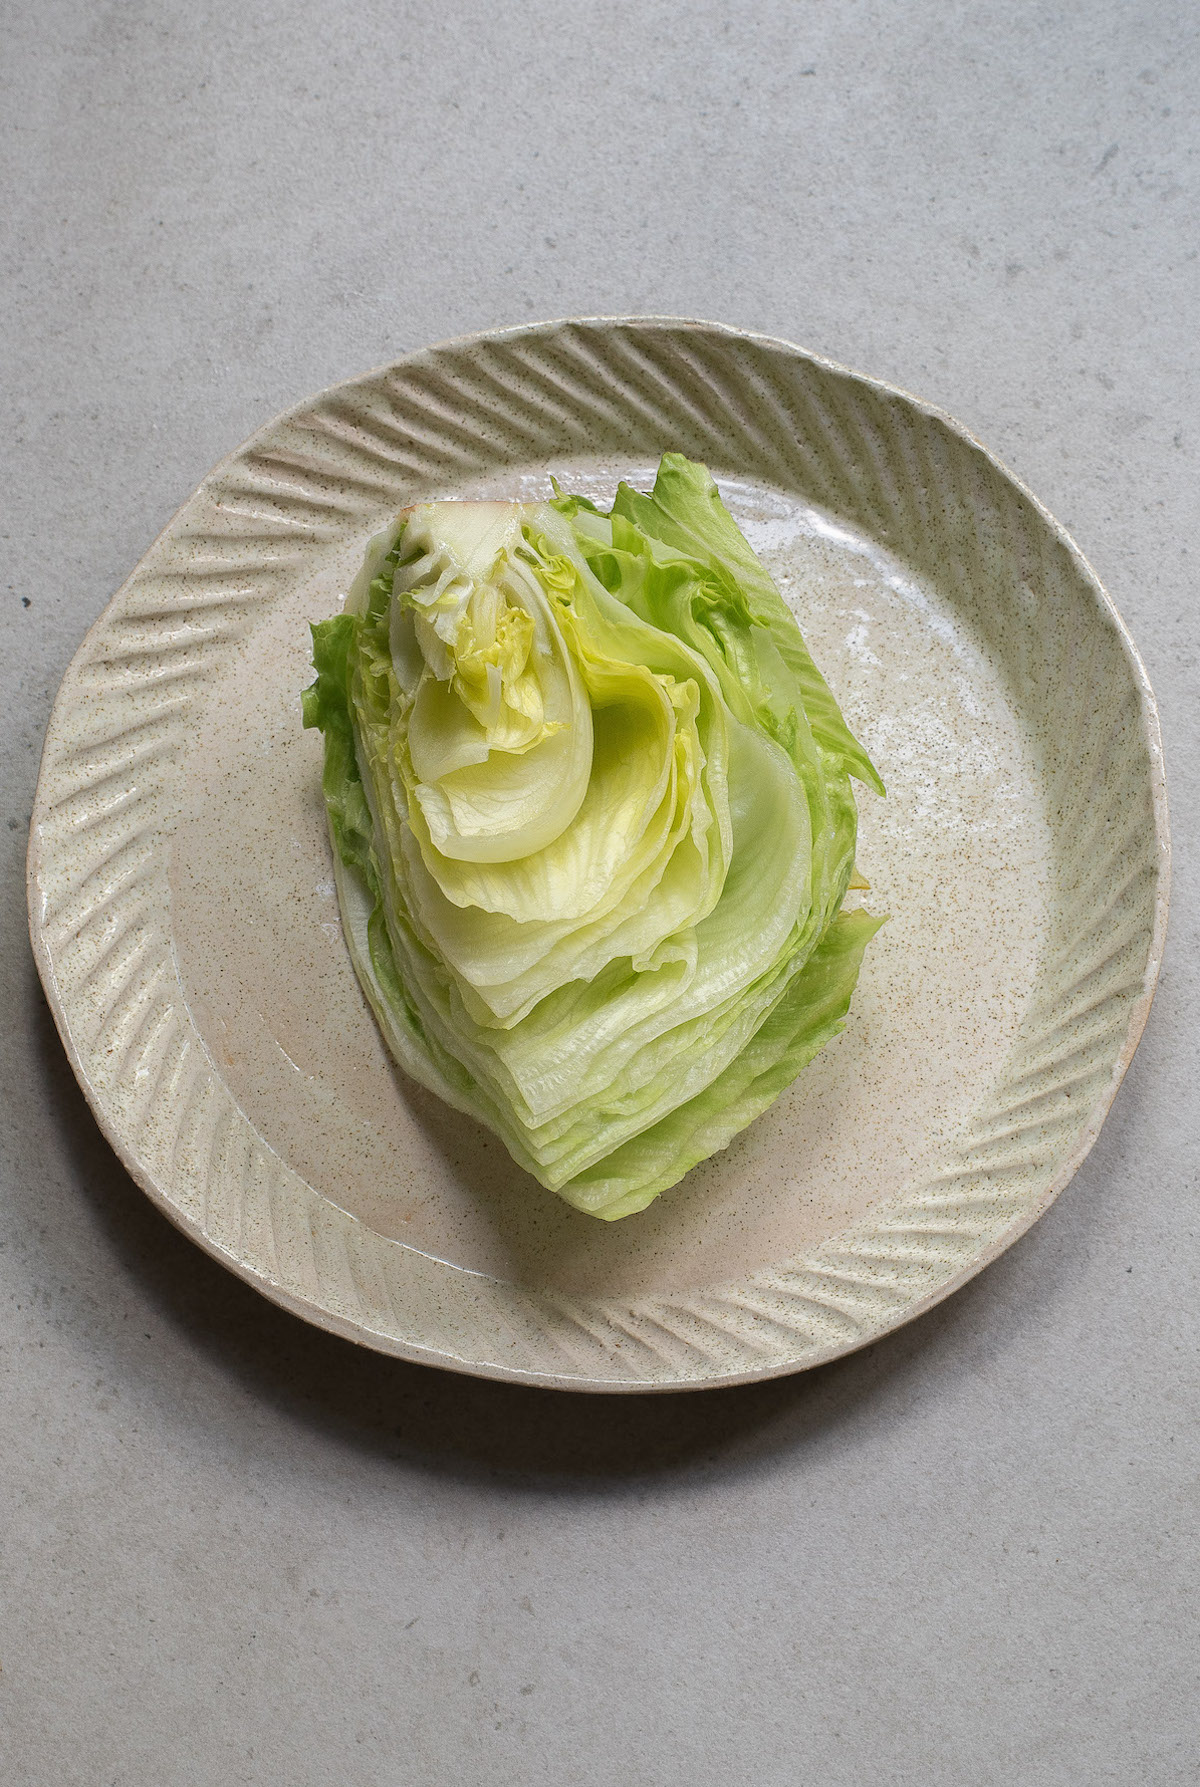 one wedge of iceberg lettuce on a serving plate